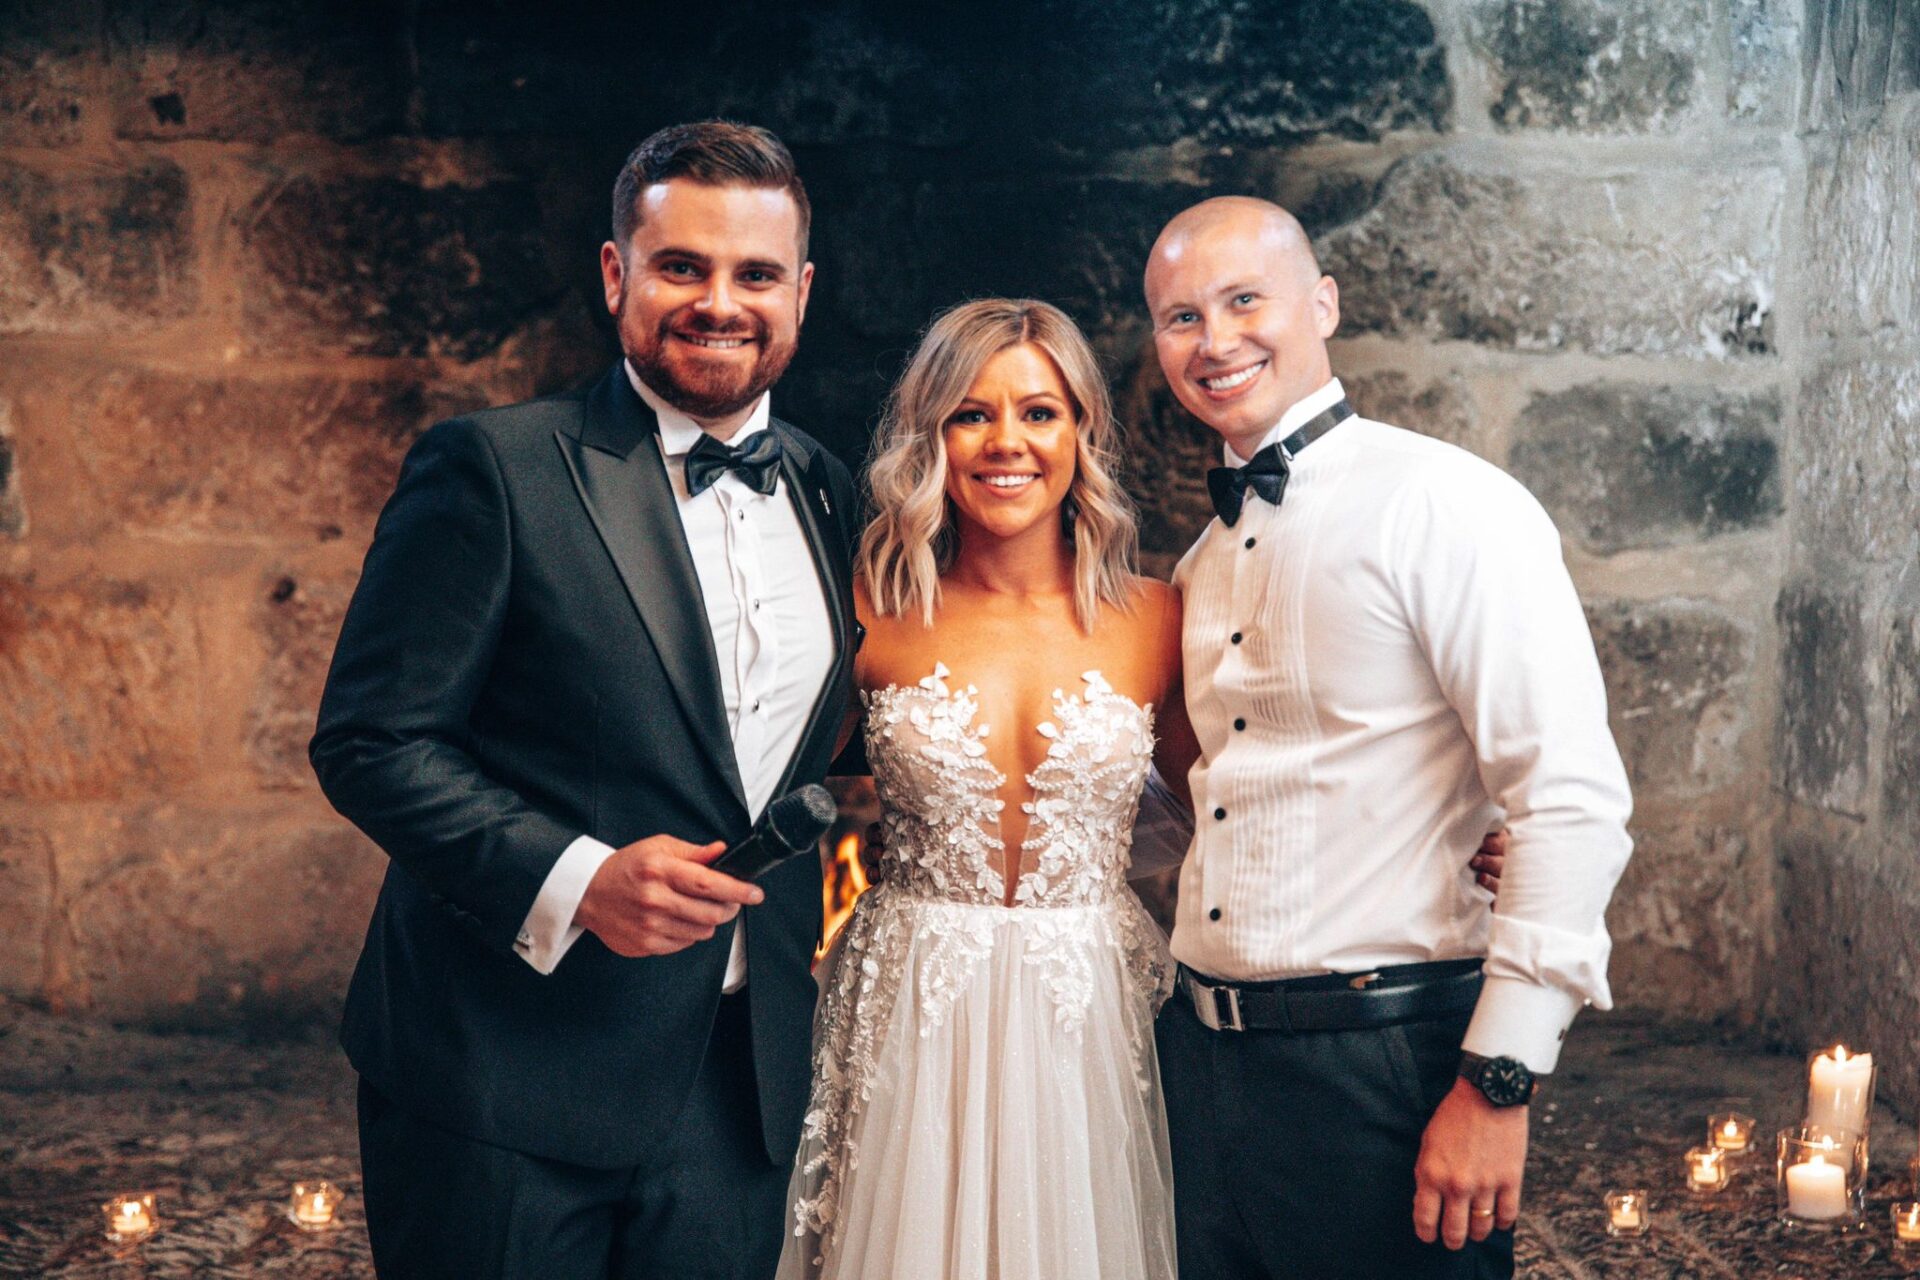 Nahan Cassar MC smiling with newlyweds Kristy and Drew